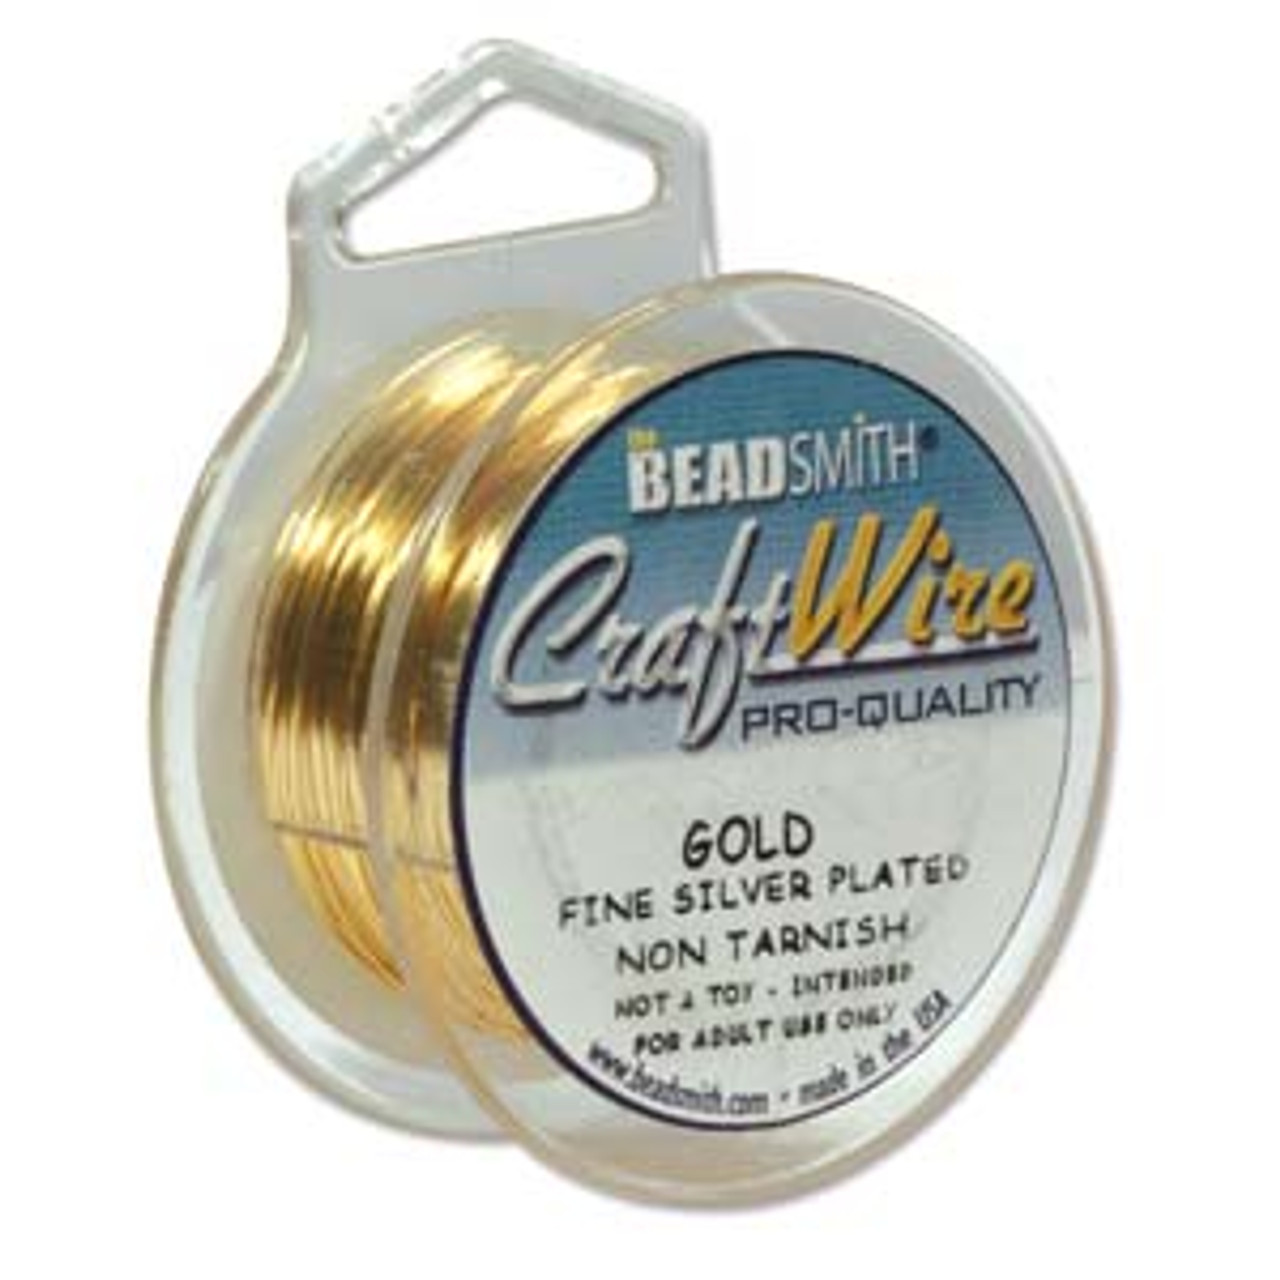 BeadSmith Craft Wire 20 Gauge GOLD PLATED